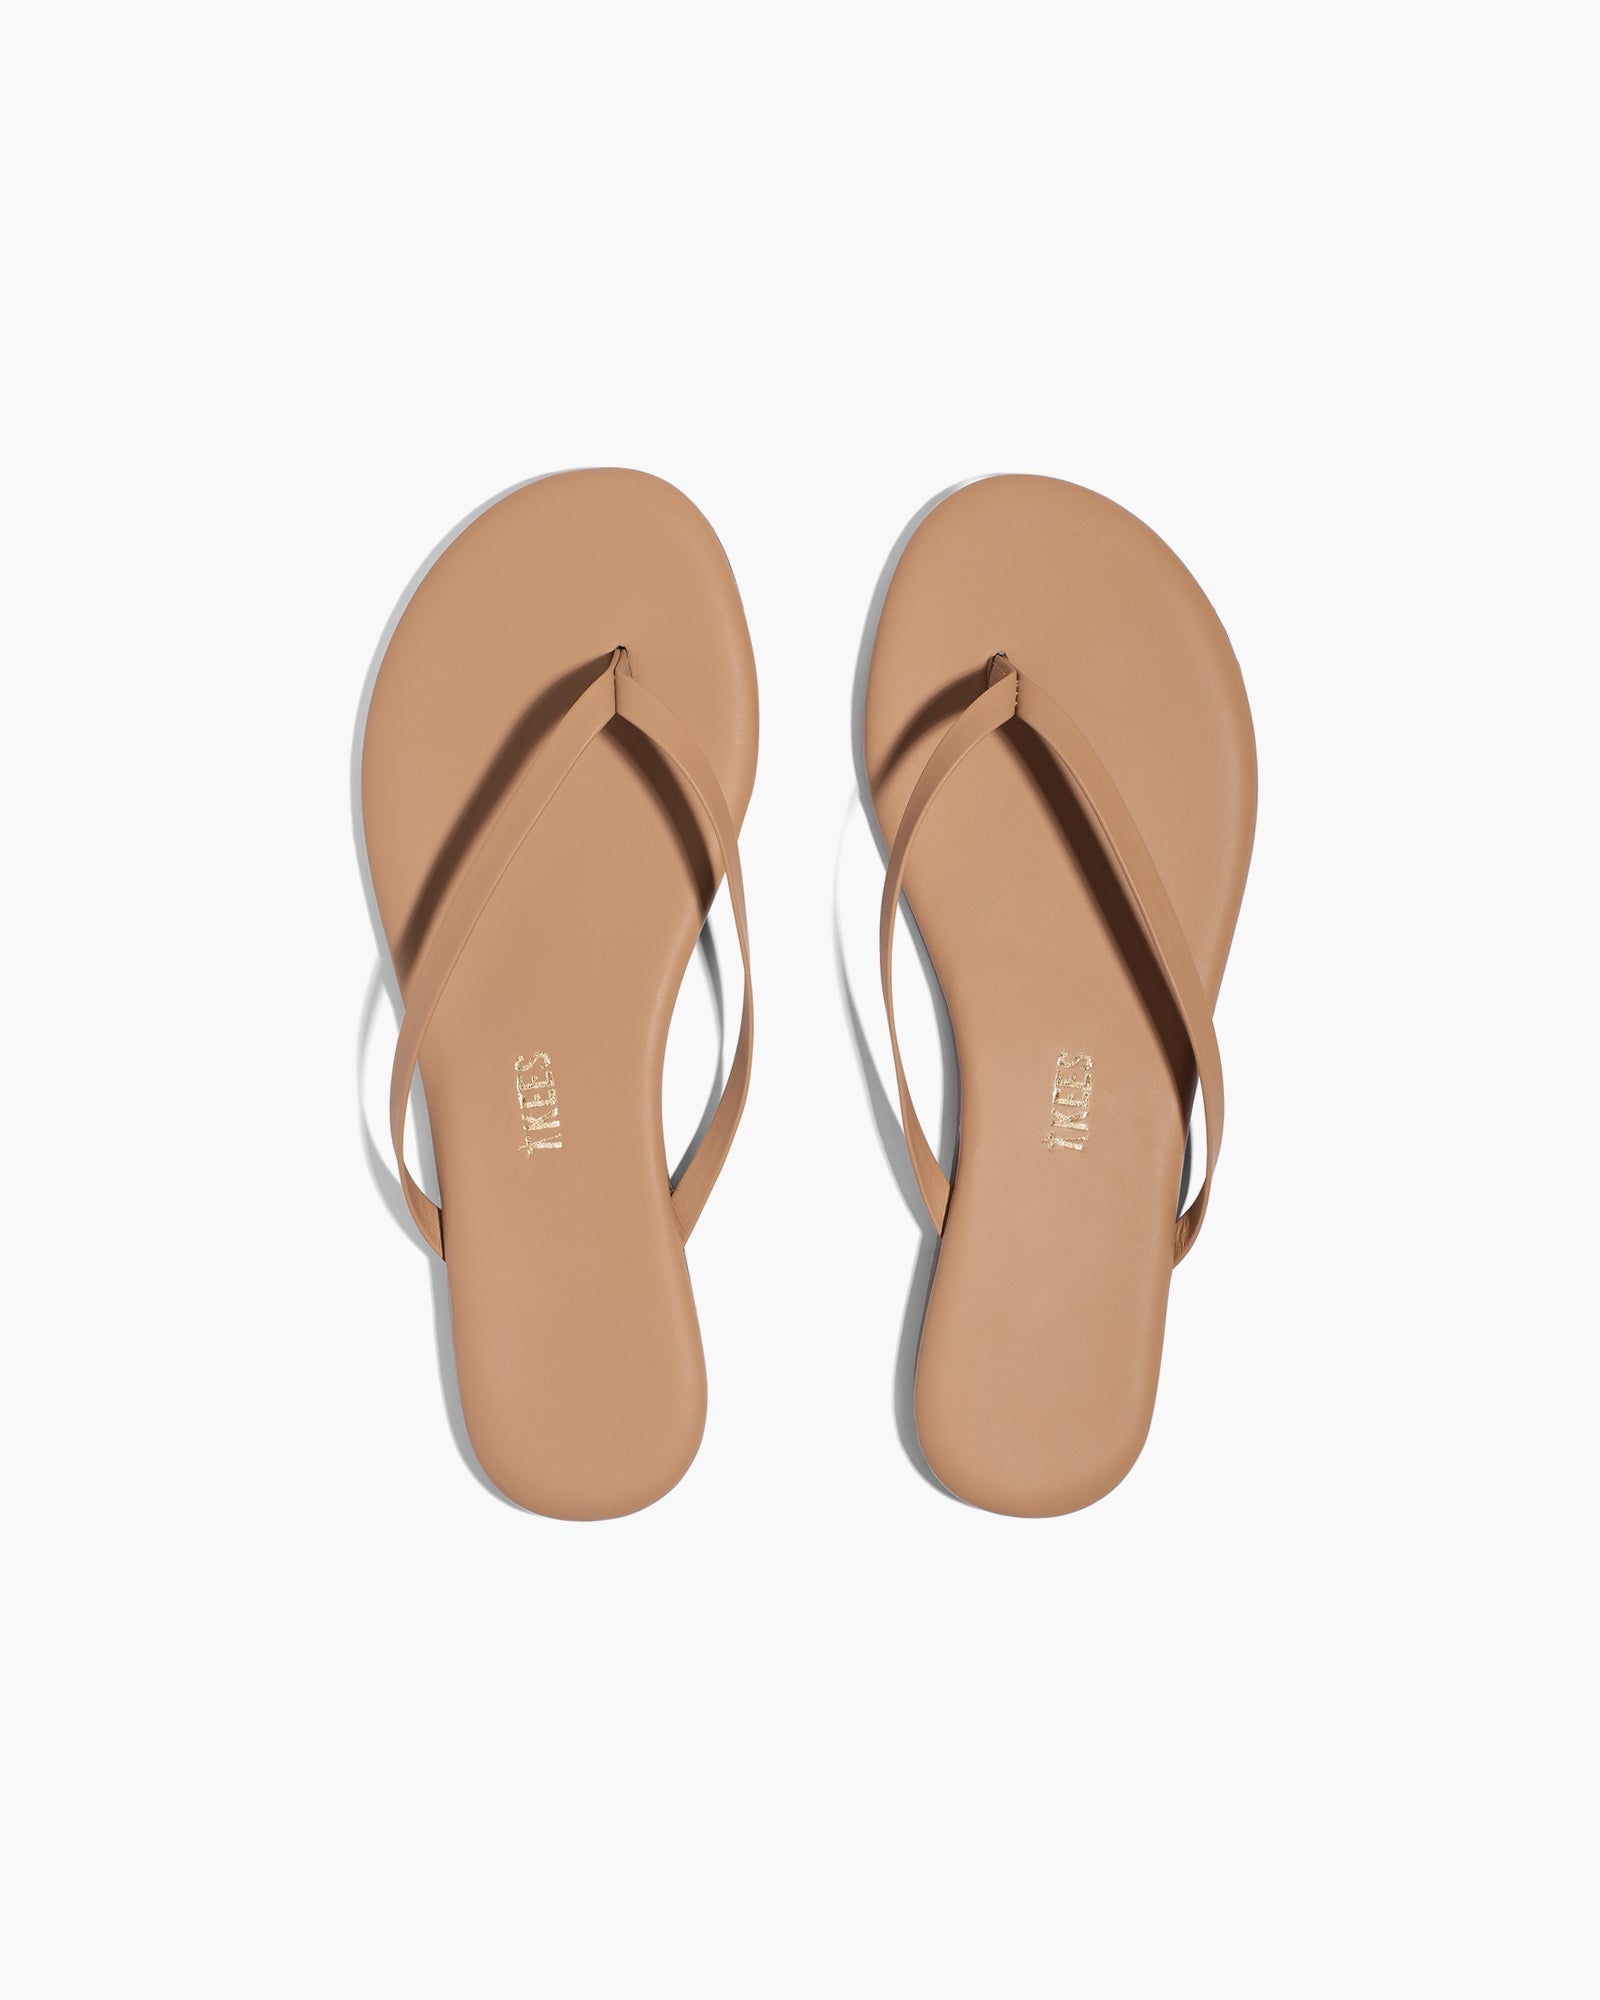 TKEES Lily Nudes Women's Flip Flops Pink | ORH852604